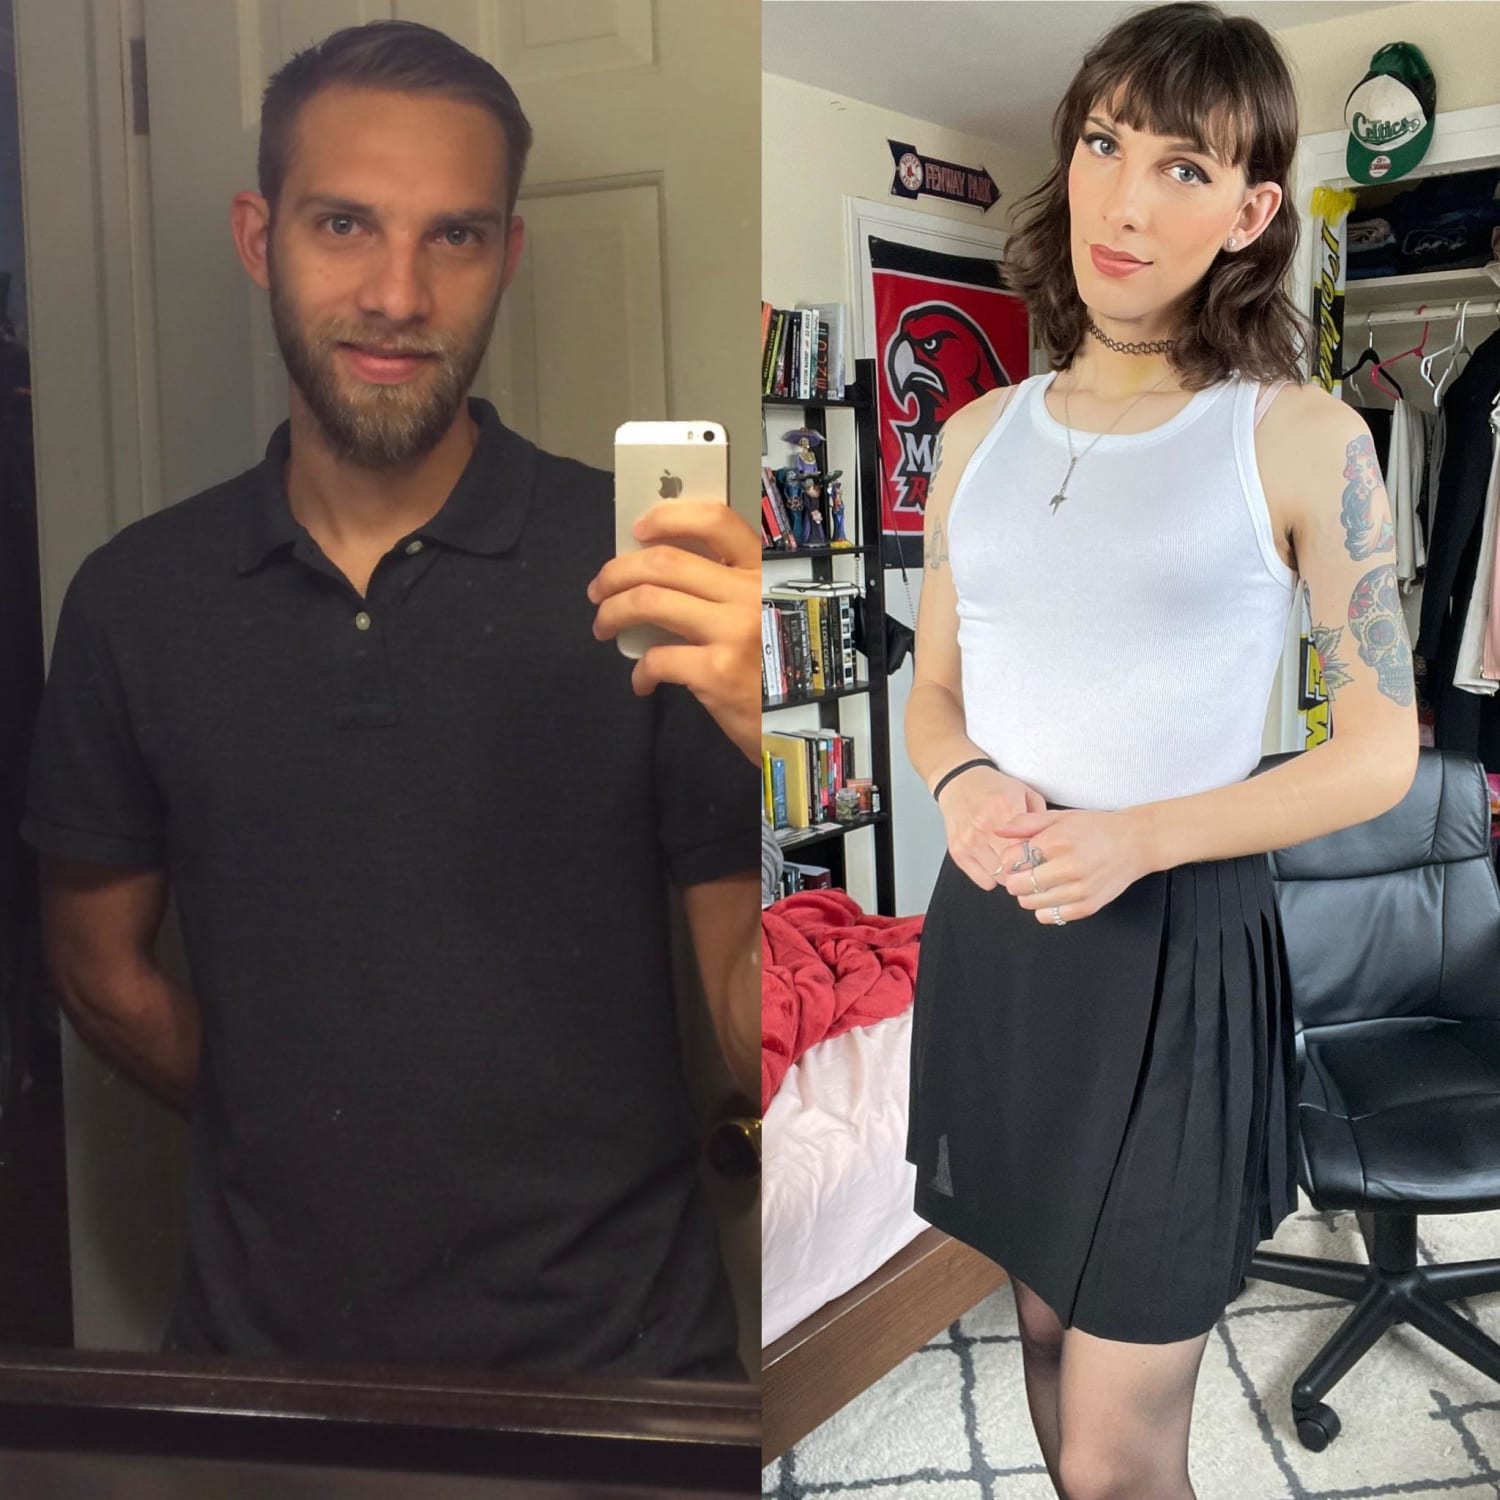 This is what drinking Oregon tap water did to me. Ya gotta be careful out there, kids. (MTF 14mos HRT). I’m open to questions!